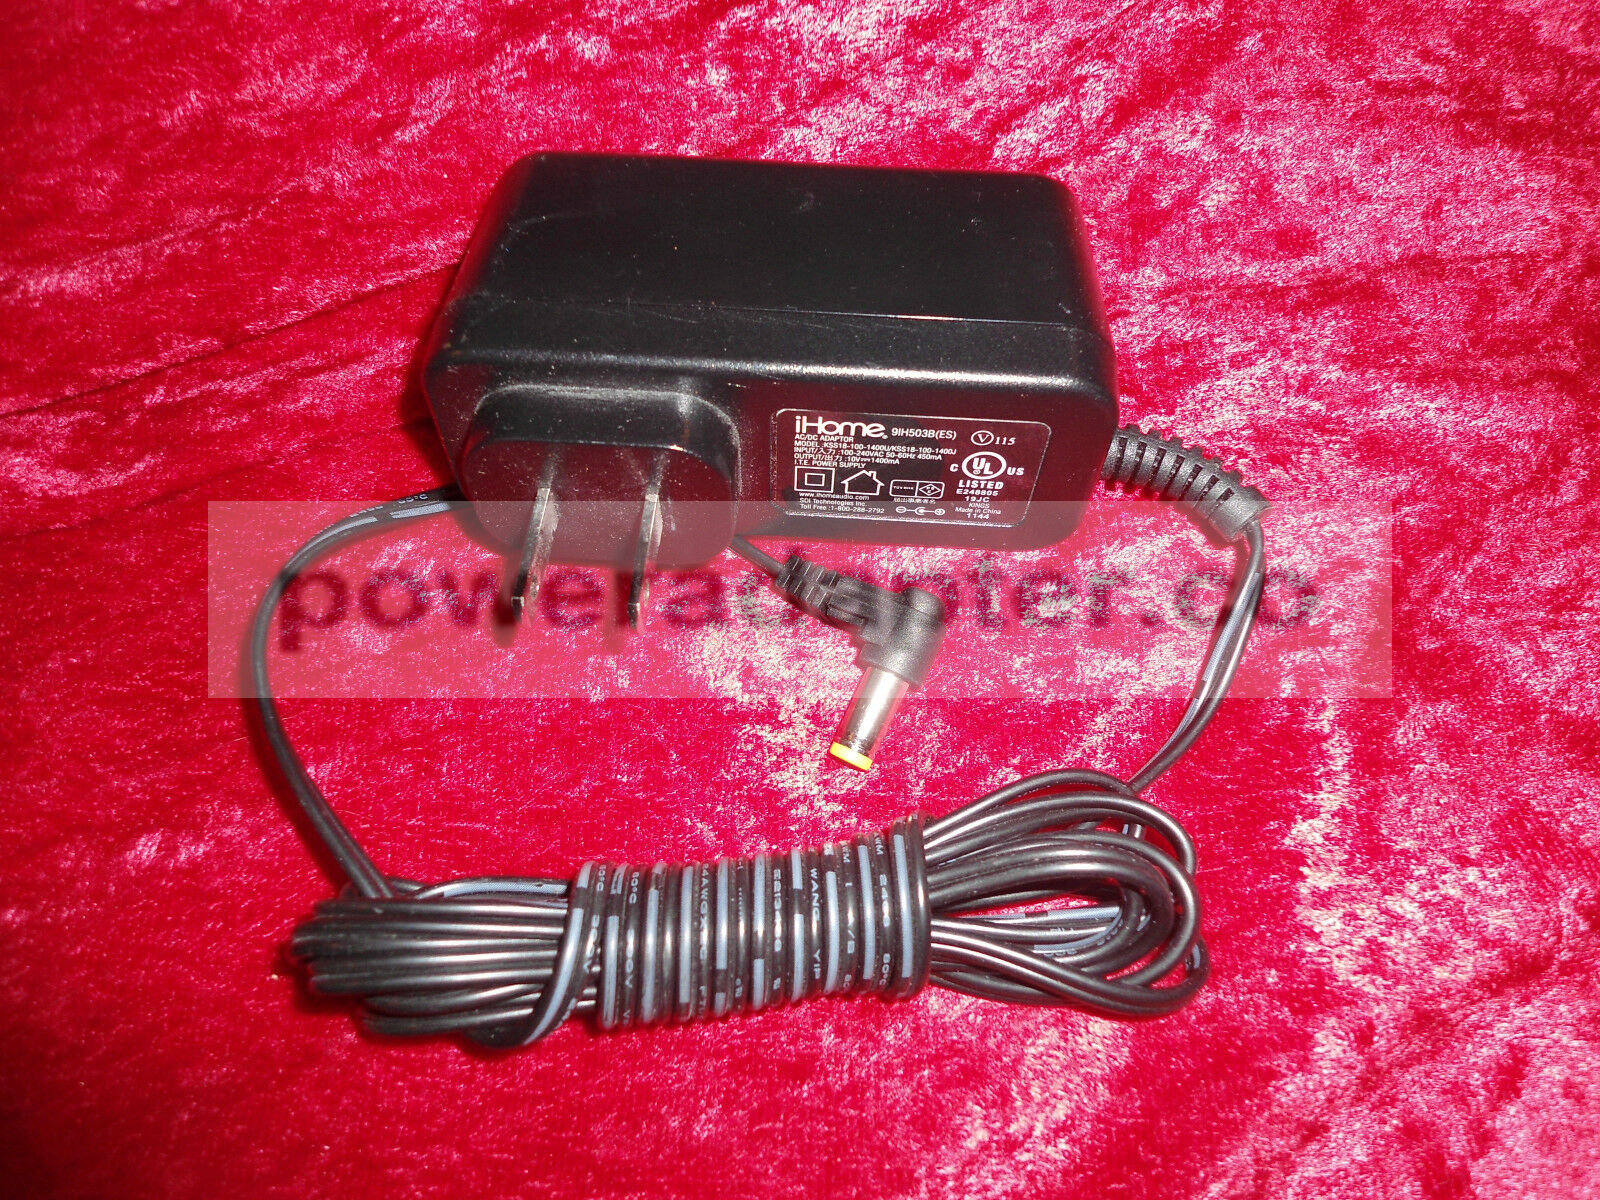 iHome AC/DC Adaptor KSS18-100-1400U 9IH503B(ES) 10V DC 1400mA Power Supply Condition: Used: An item that has been us - Click Image to Close